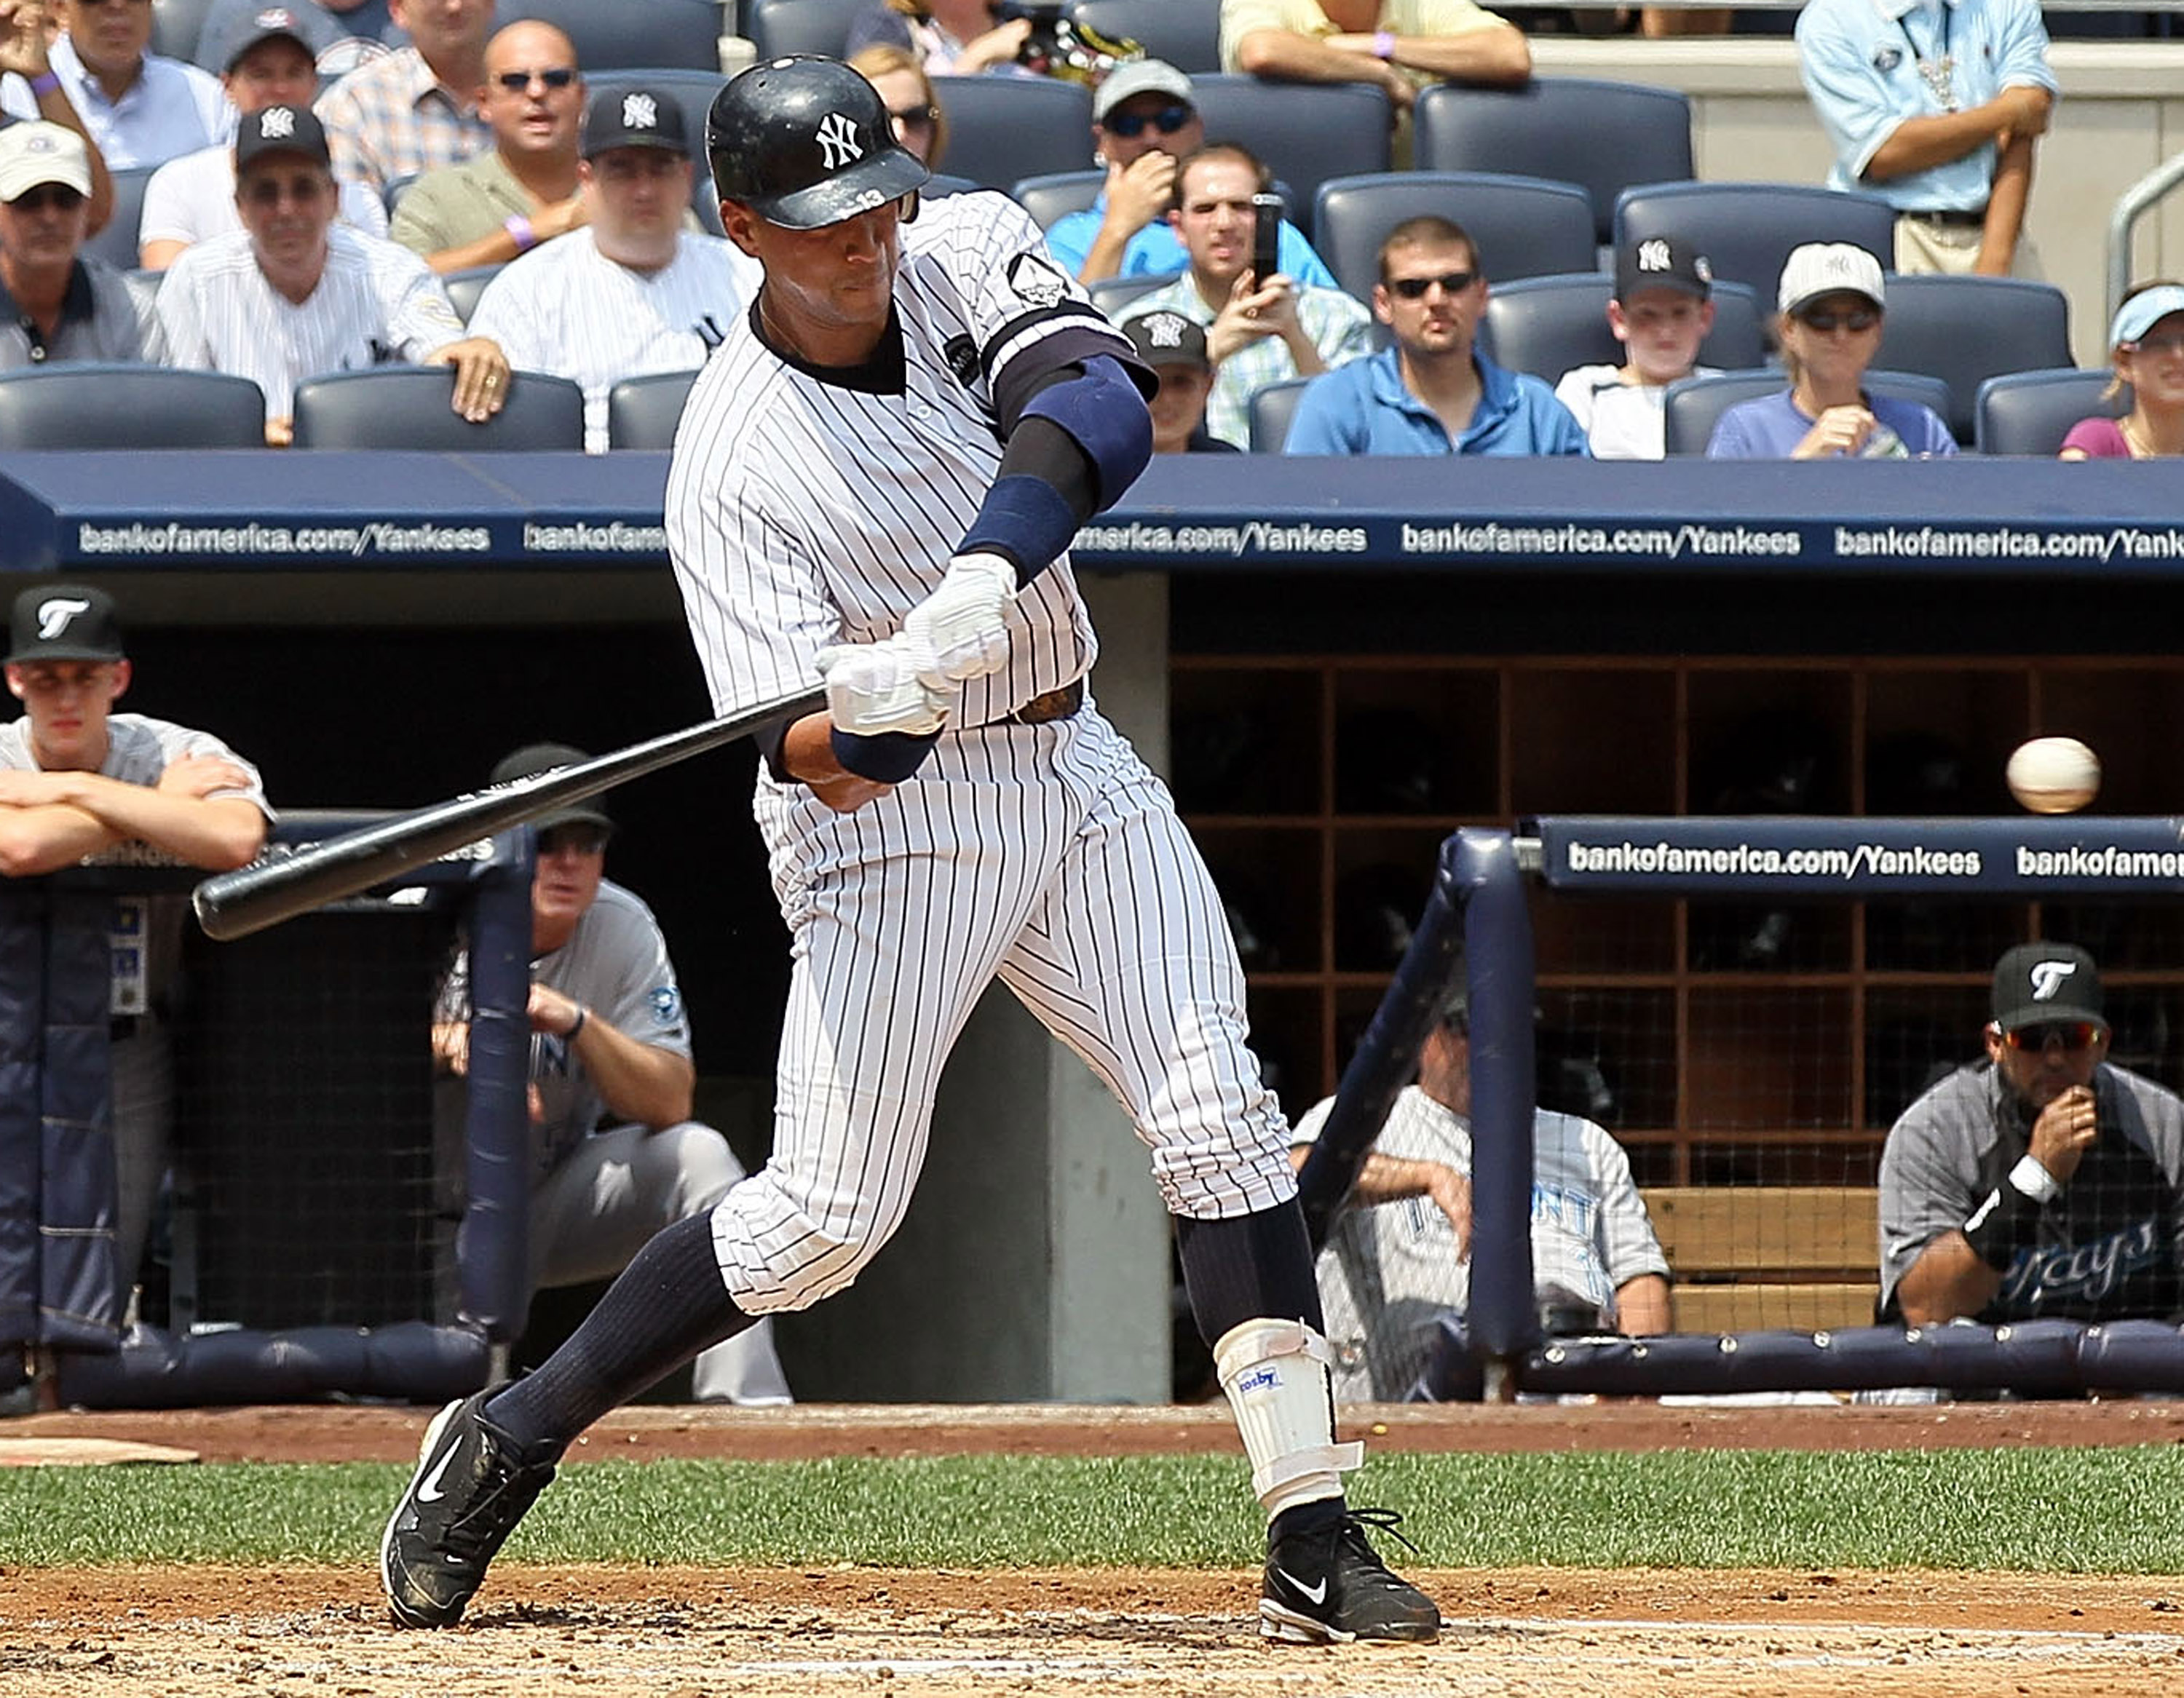 NEW YORK - AUGUST 04:  Alex Rodriguez #13 of the New York Yankees connects on his 600th career home run in the first inning against the Toronto Blue Jays on August 4, 2010 at Yankee Stadium in the Bronx borough of New York City.  (Photo by Jim McIsaac/Get